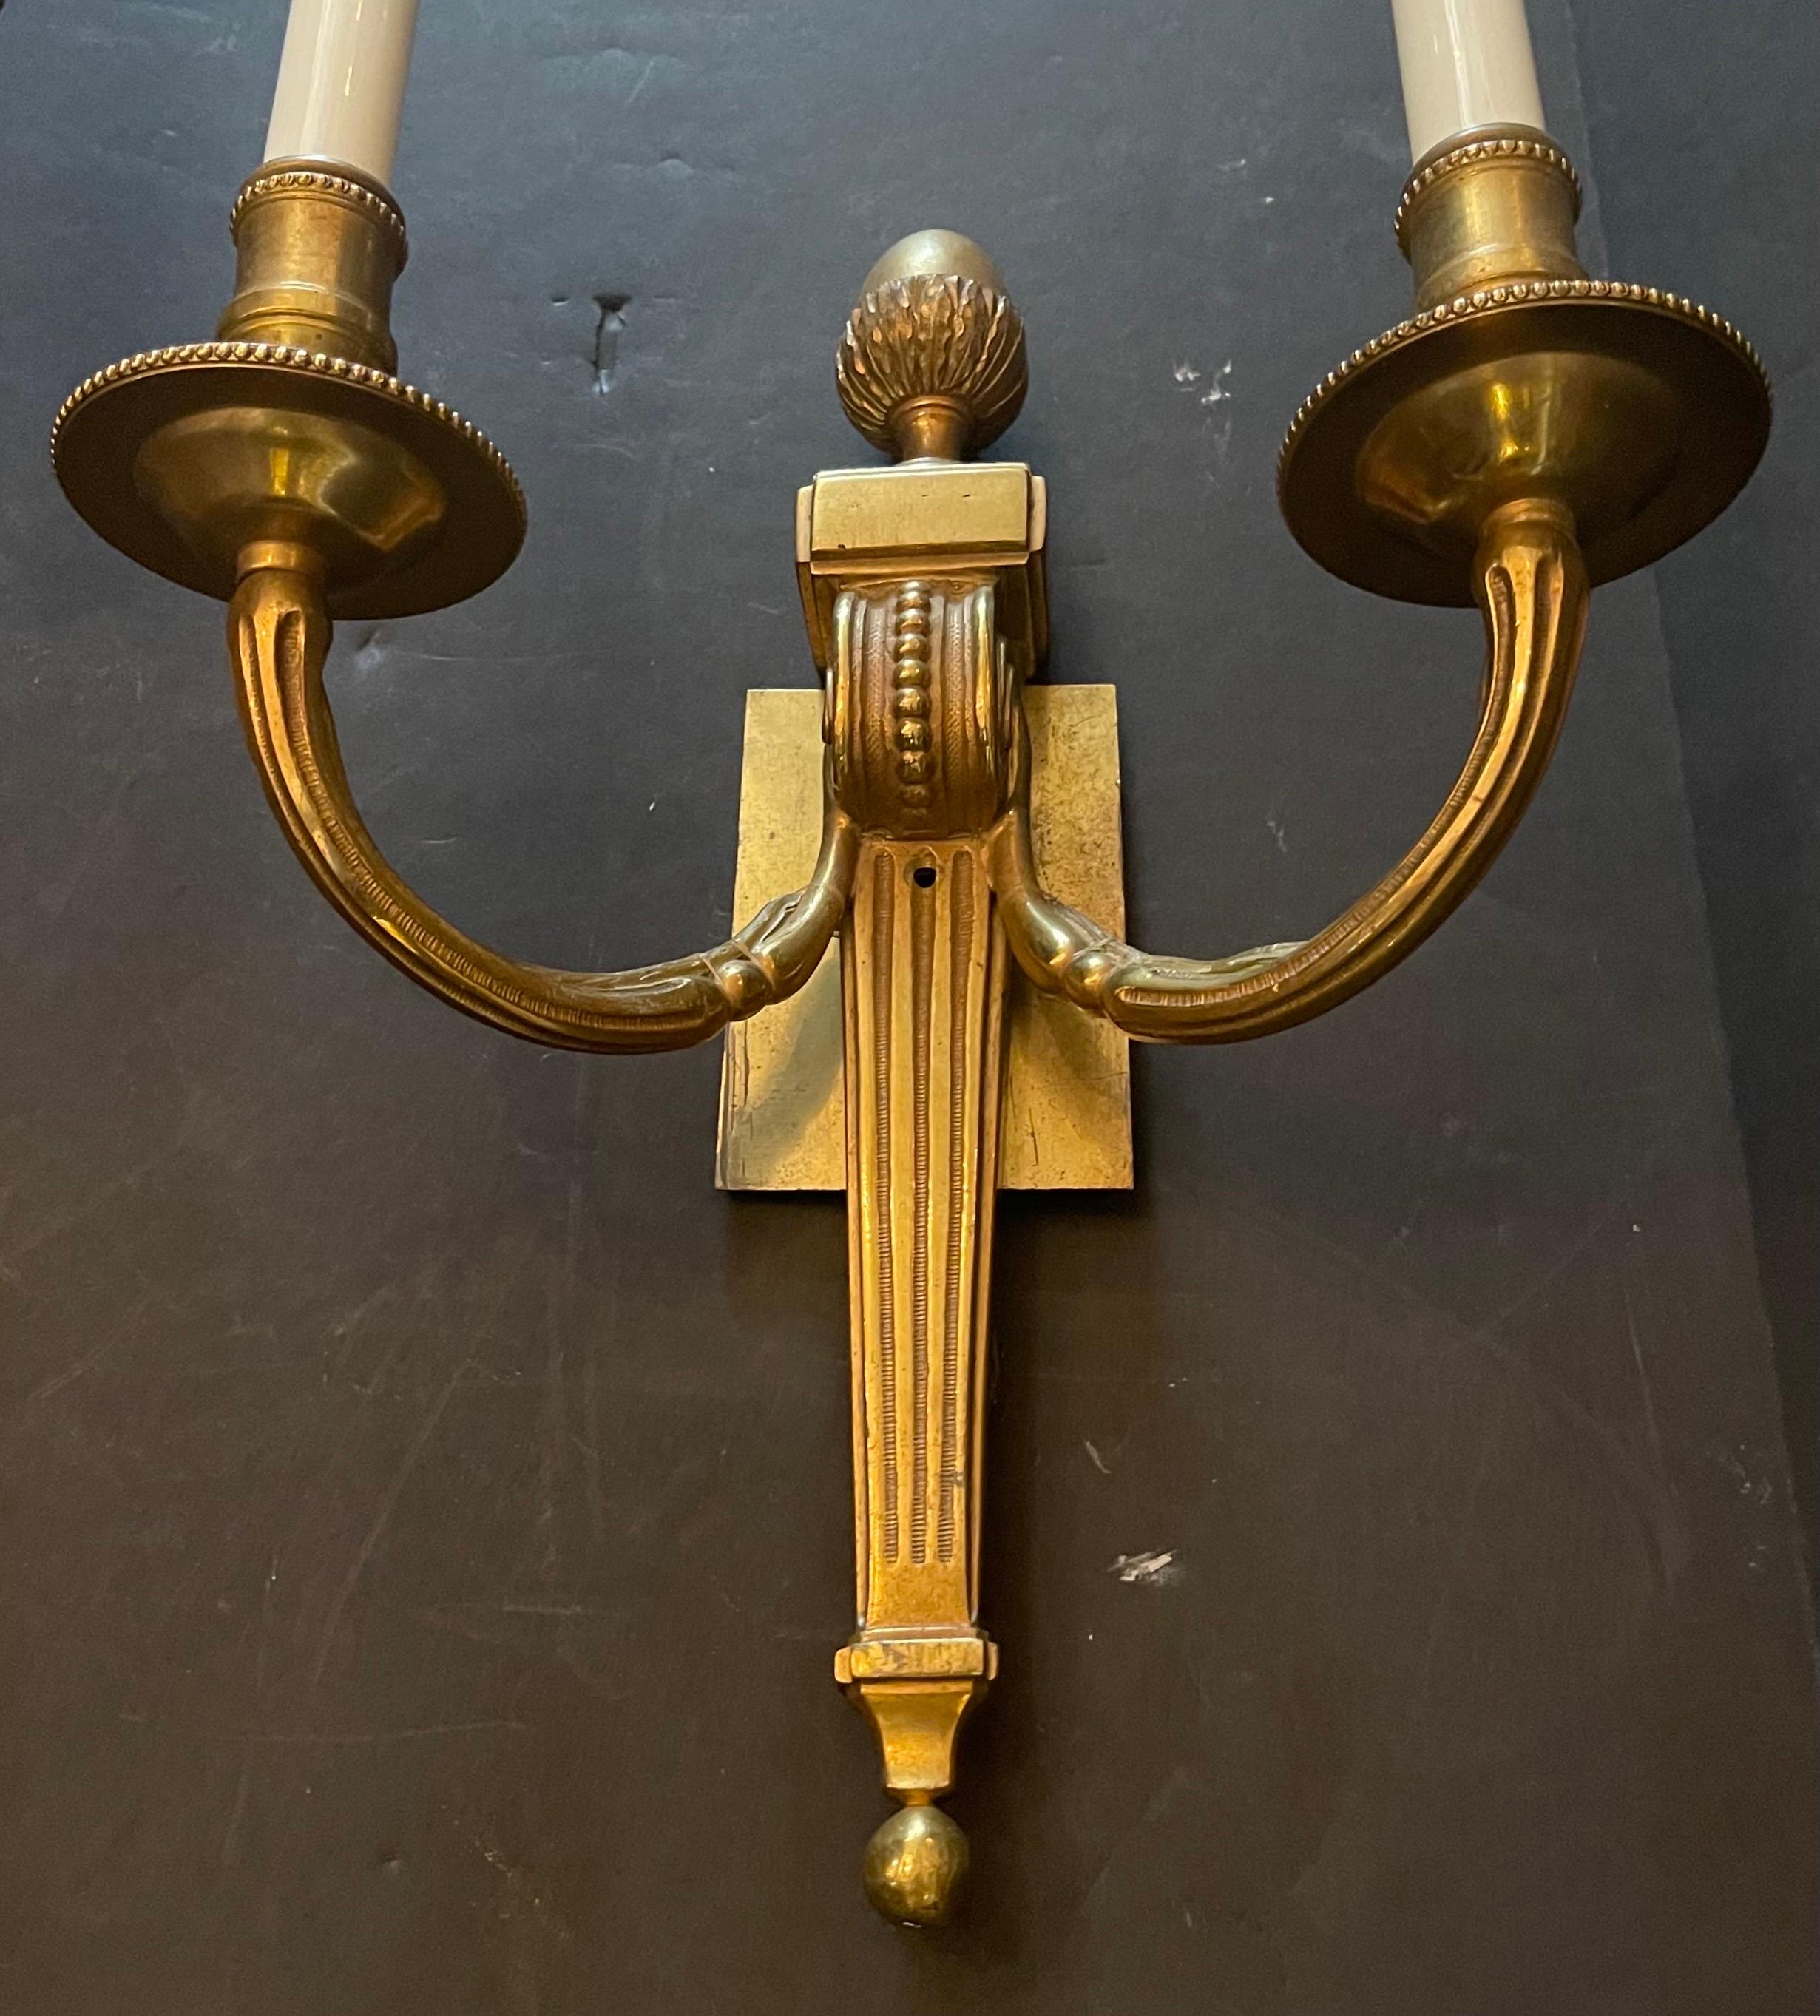 Wonderful French Empire Neoclassical Bronze Urn Caldwell Two Candelabra Sconces In Good Condition For Sale In Roslyn, NY